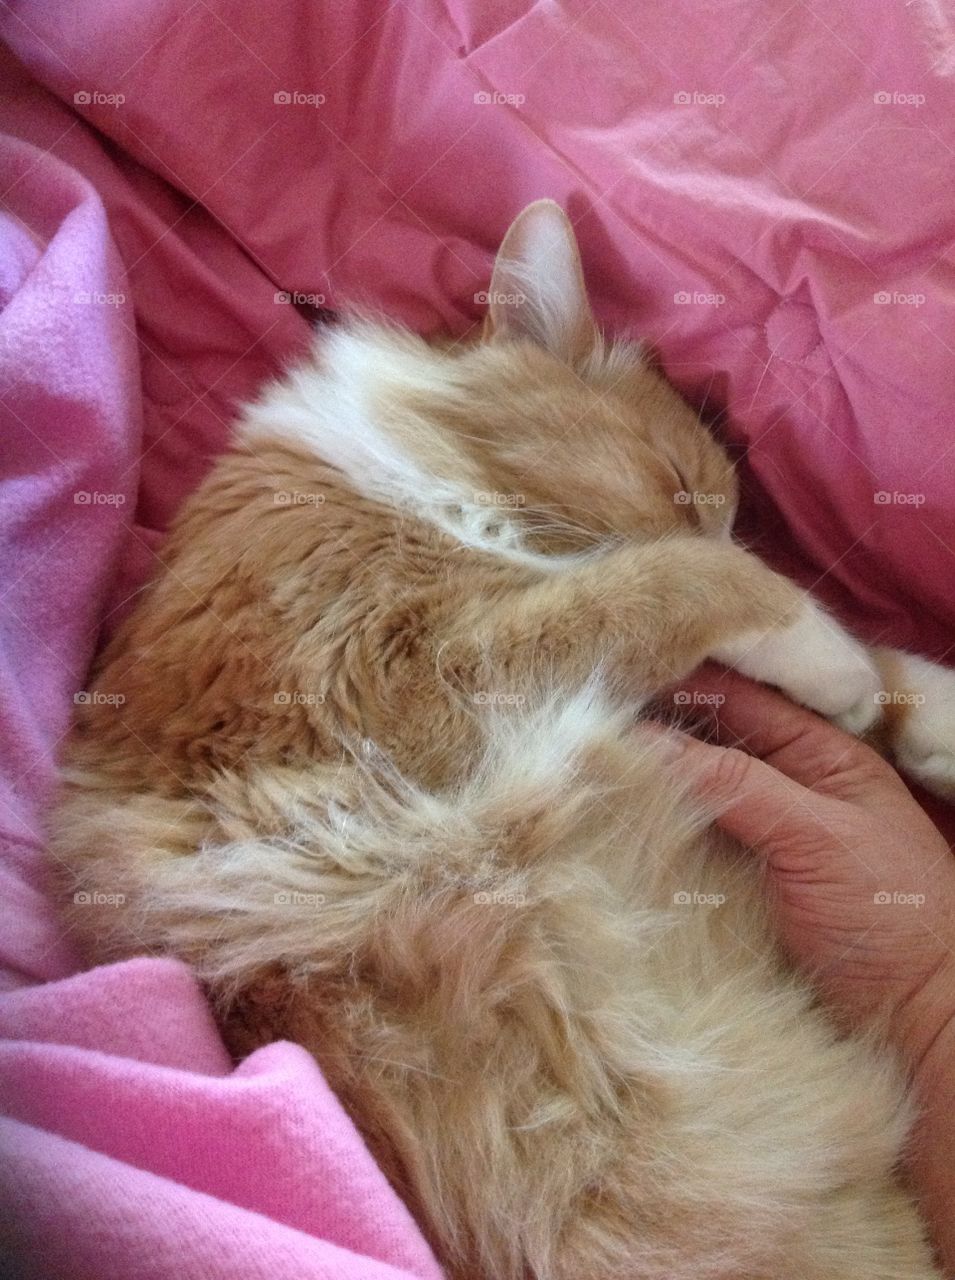 Buff and white cat on pink blanket, curled up asleep, nose covered by paw